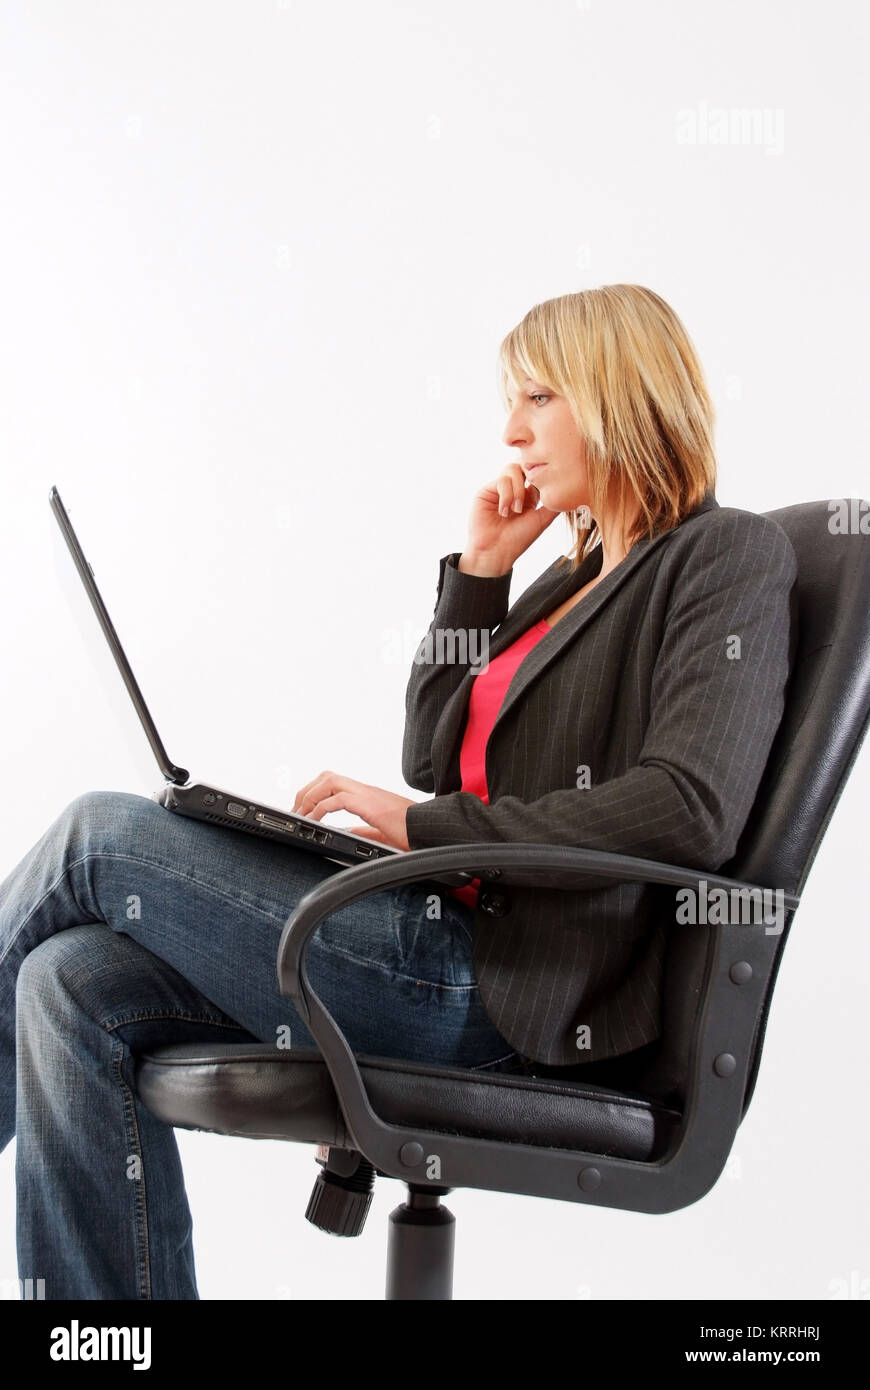 Junge Geschaeftsfrau mit Laptop im Chefsessel - young businesswoman in executive chair Stock Photo